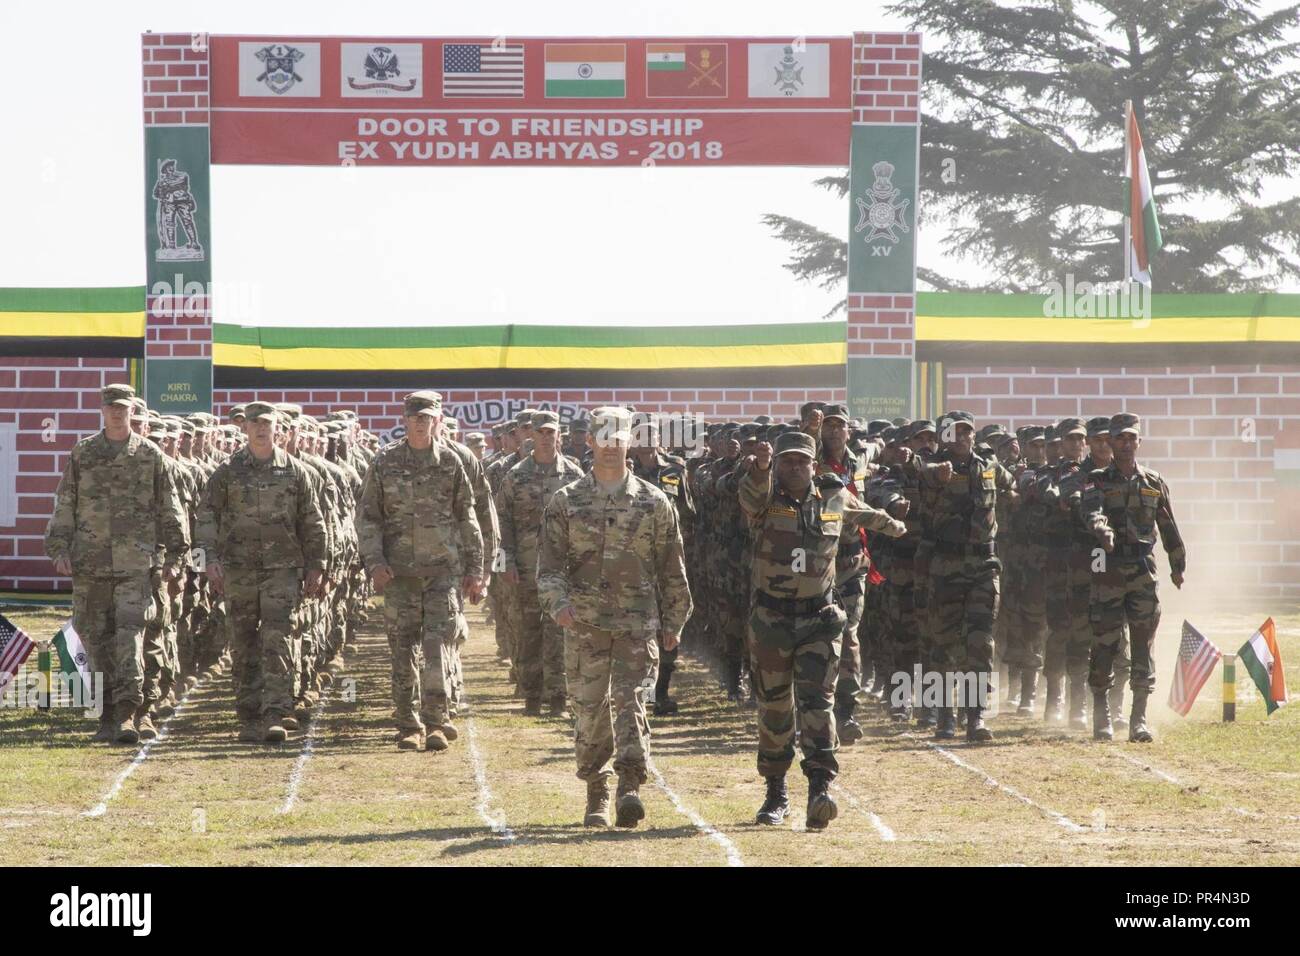 Soldiers with the U.S. and Indian Armies march onto a parade field at Chaubattia Military Station in Ranikhet, India, Sept. 16, 2018, during the opening ceremony of Yudh Abhyas 18. The bilateral training exercise geared toward enhancing cooperation and coordination between the two nations’ armies through training and cultural exchanges. Stock Photo